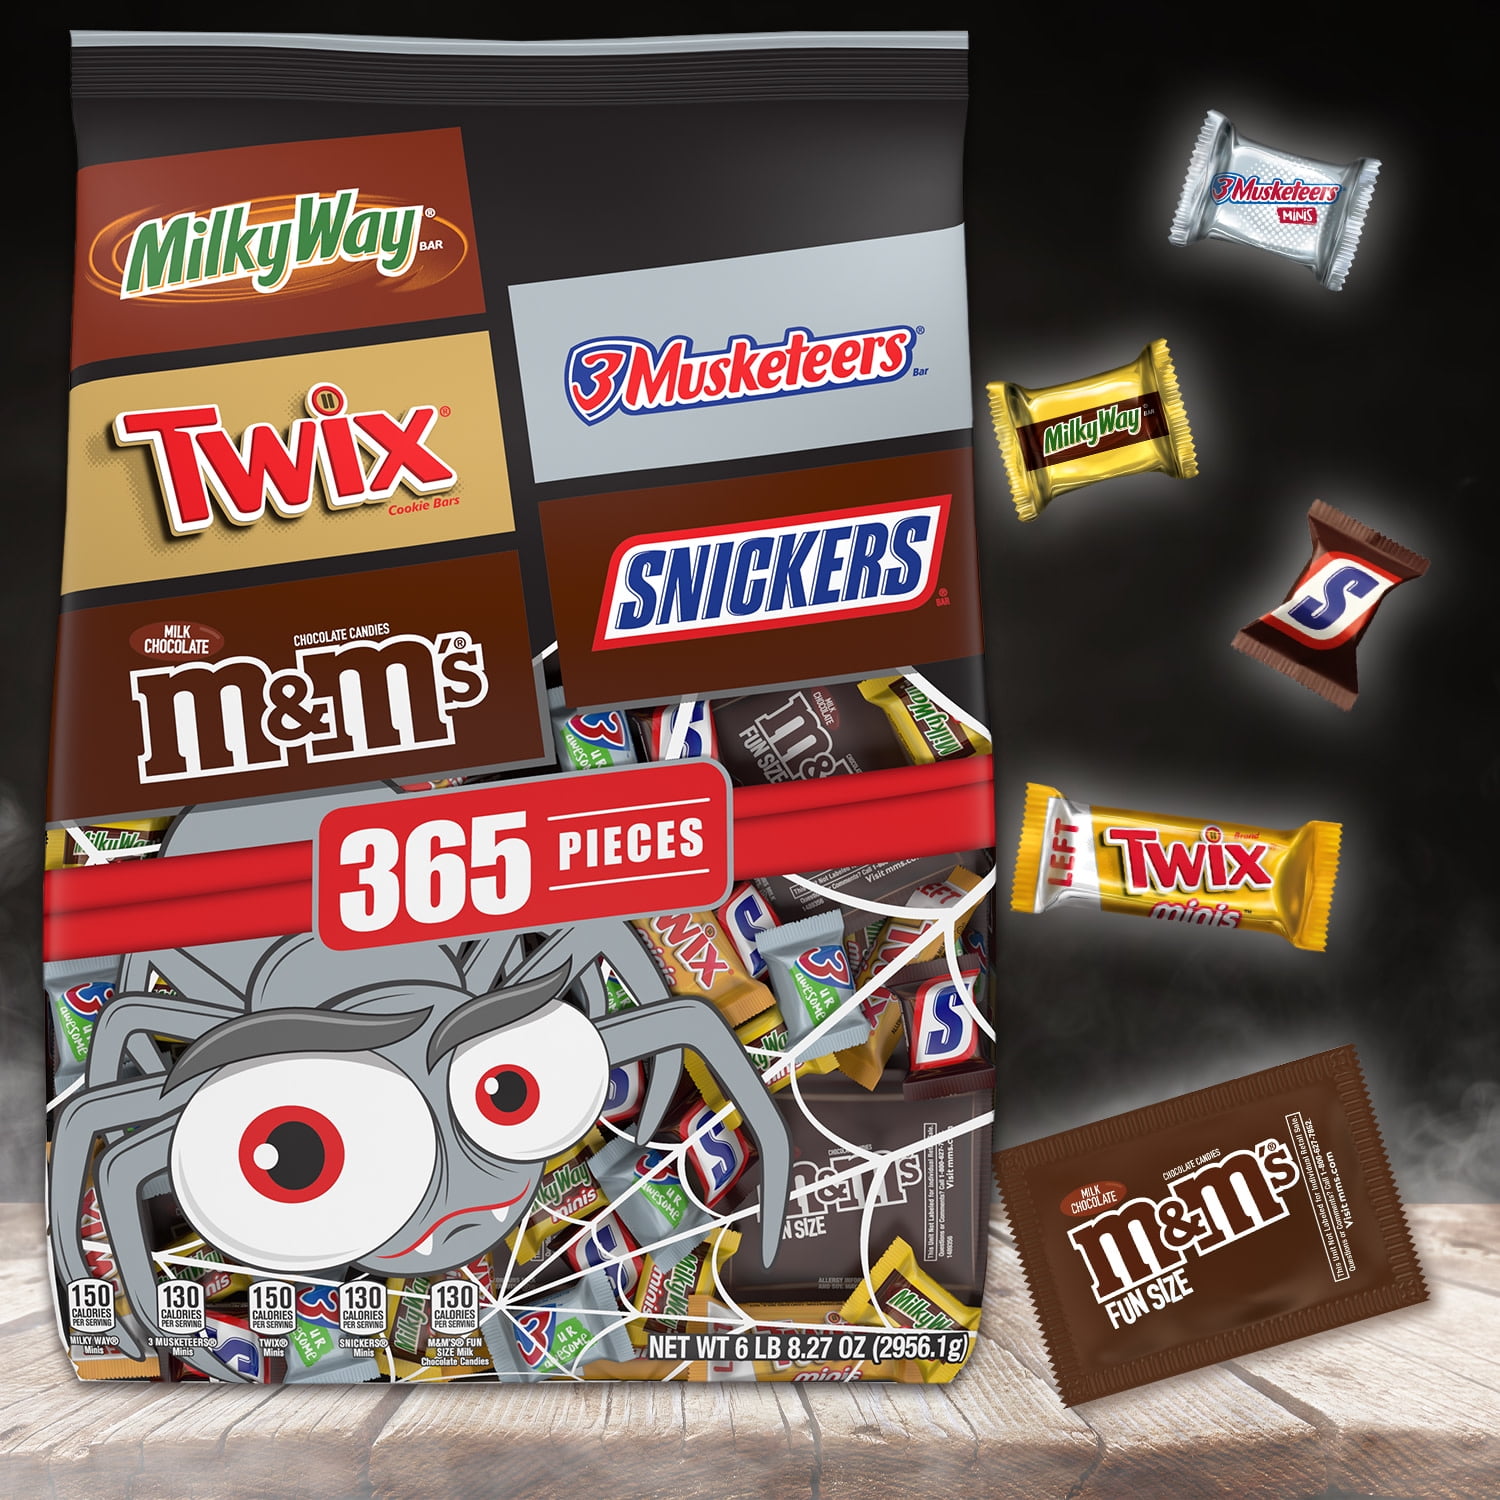 Mars SN50025 M&M'S Crispy Chocolate Candy Party Size 30-Ounce Bag 